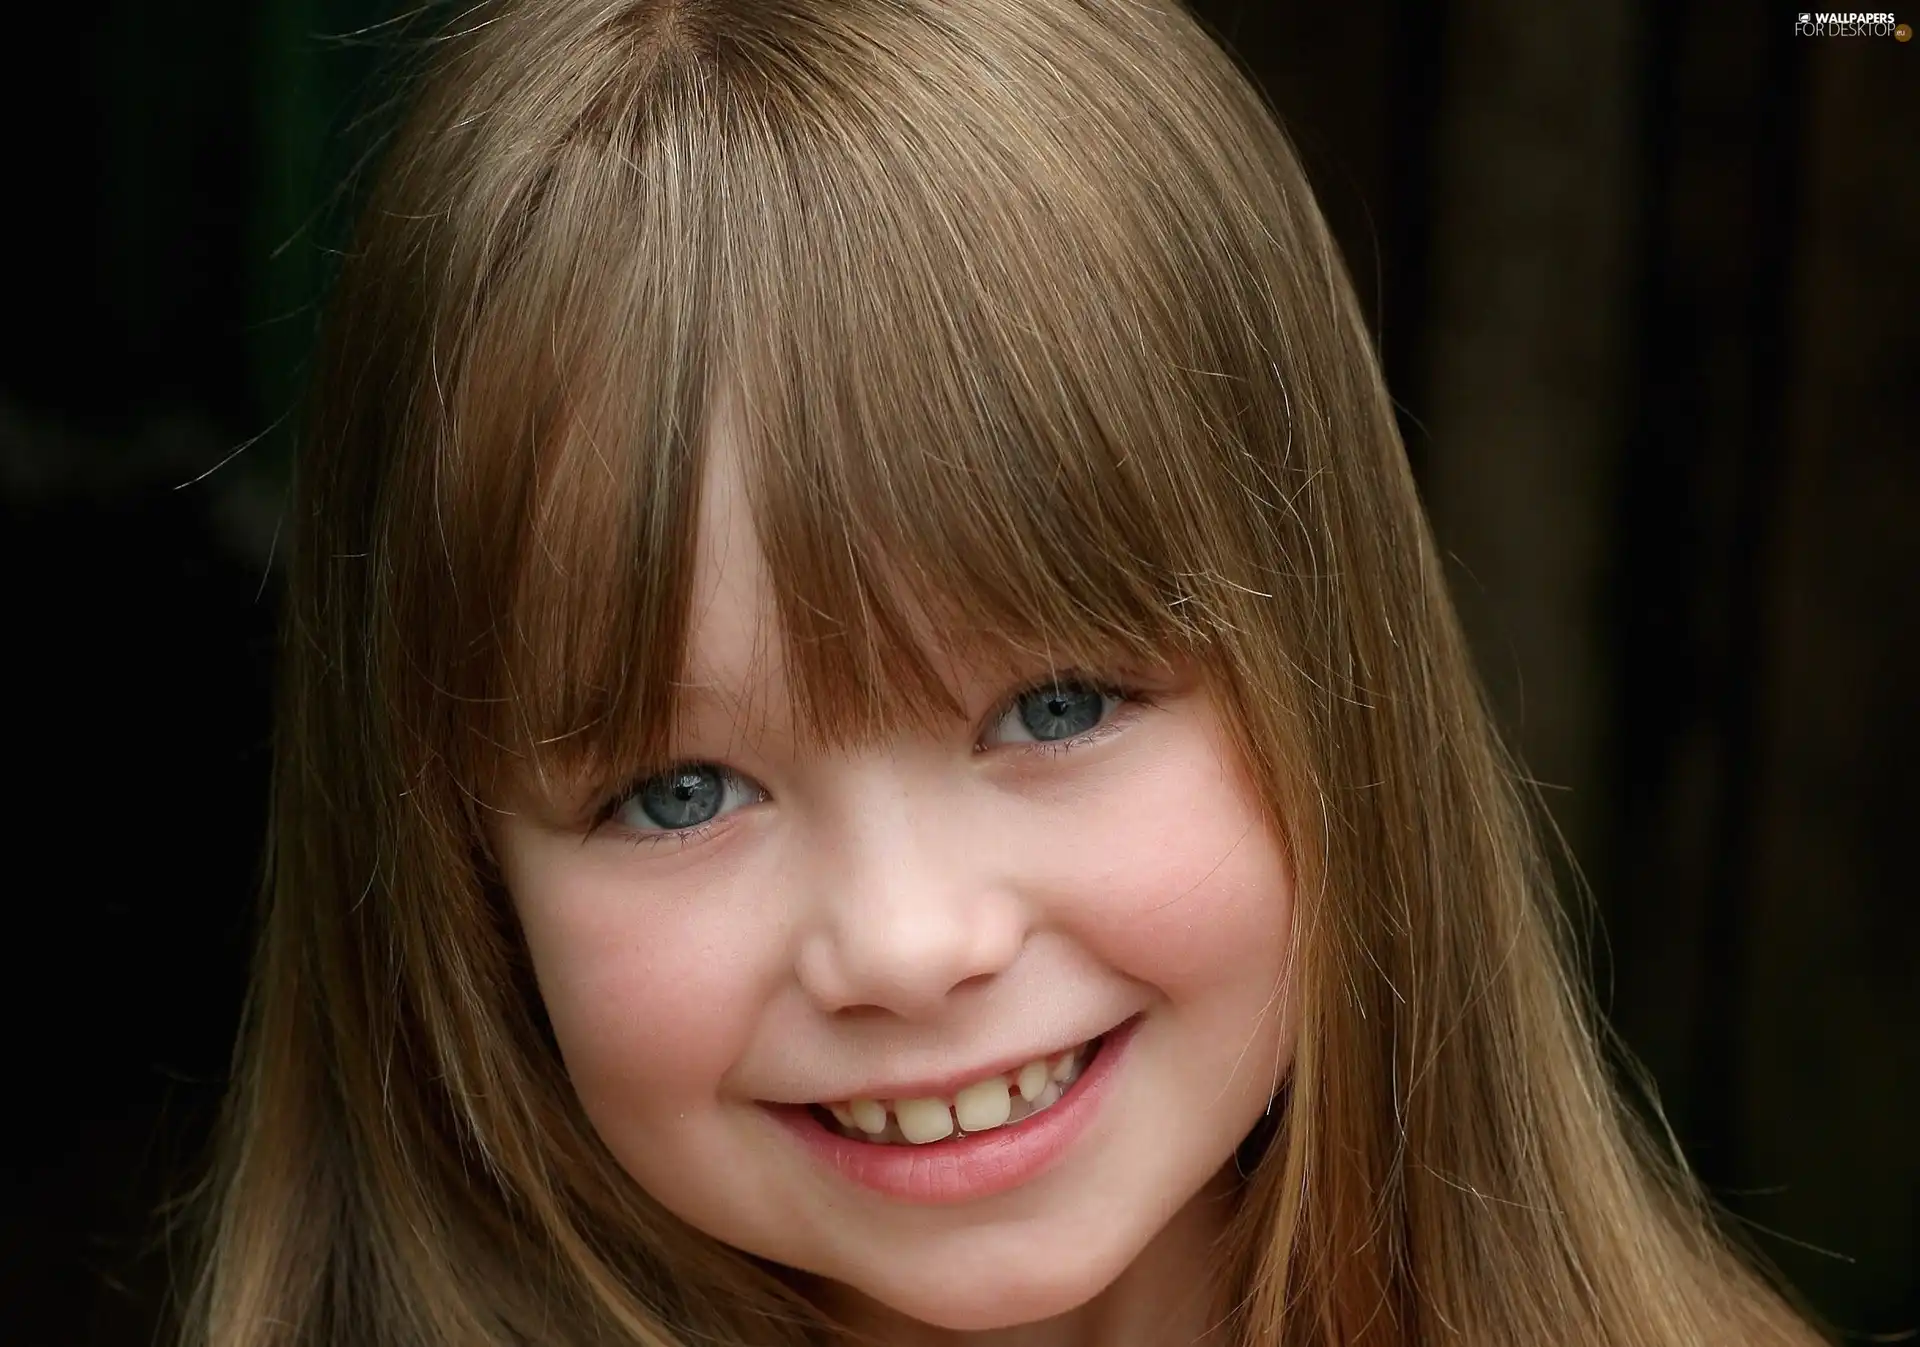 Connie Talbot, Smile, bangs, songster